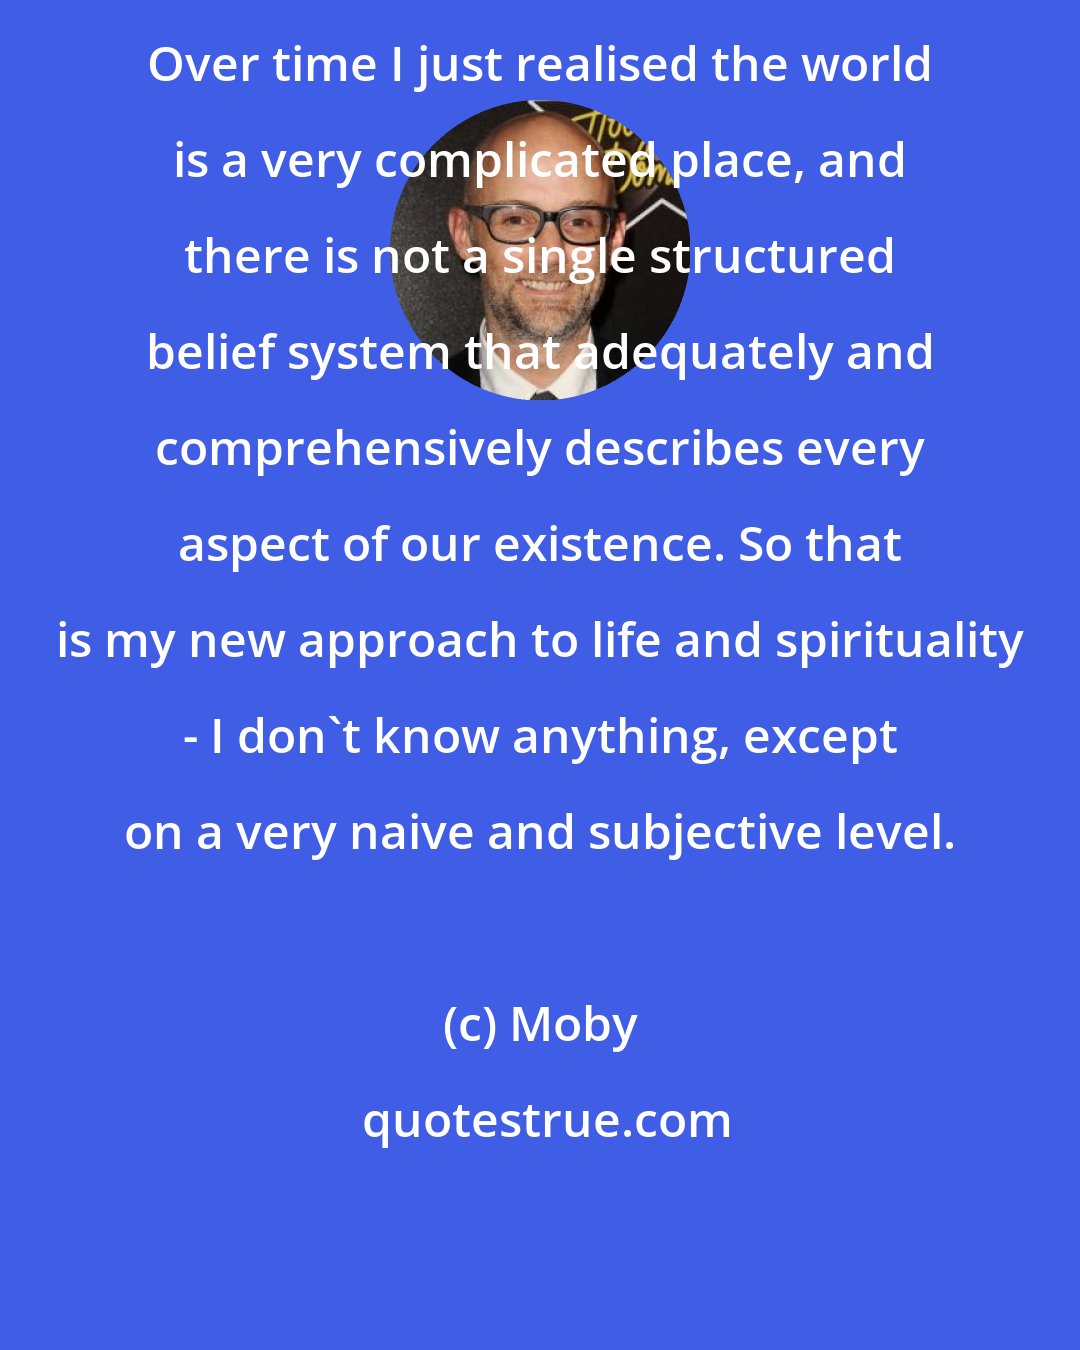 Moby: Over time I just realised the world is a very complicated place, and there is not a single structured belief system that adequately and comprehensively describes every aspect of our existence. So that is my new approach to life and spirituality - I don't know anything, except on a very naive and subjective level.